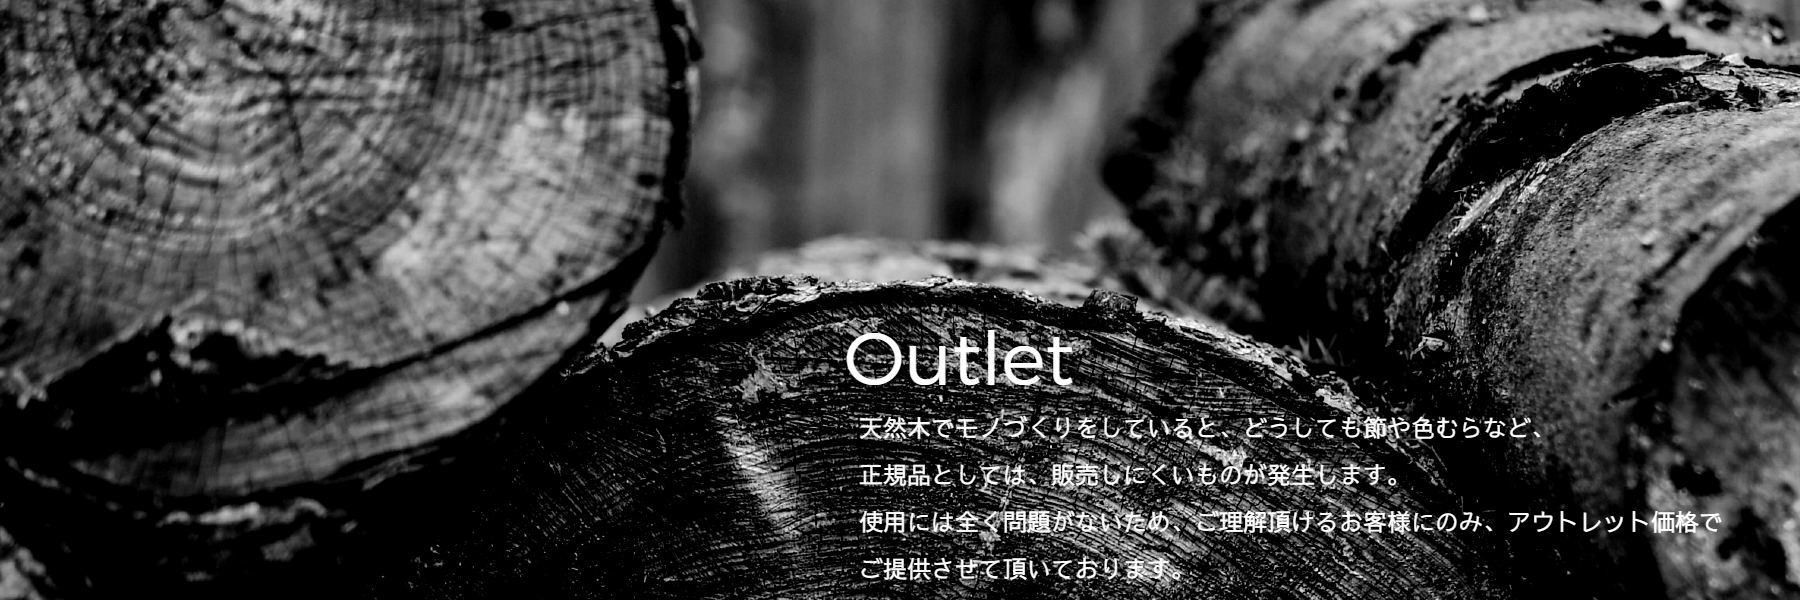 Outlet （アウトレット）